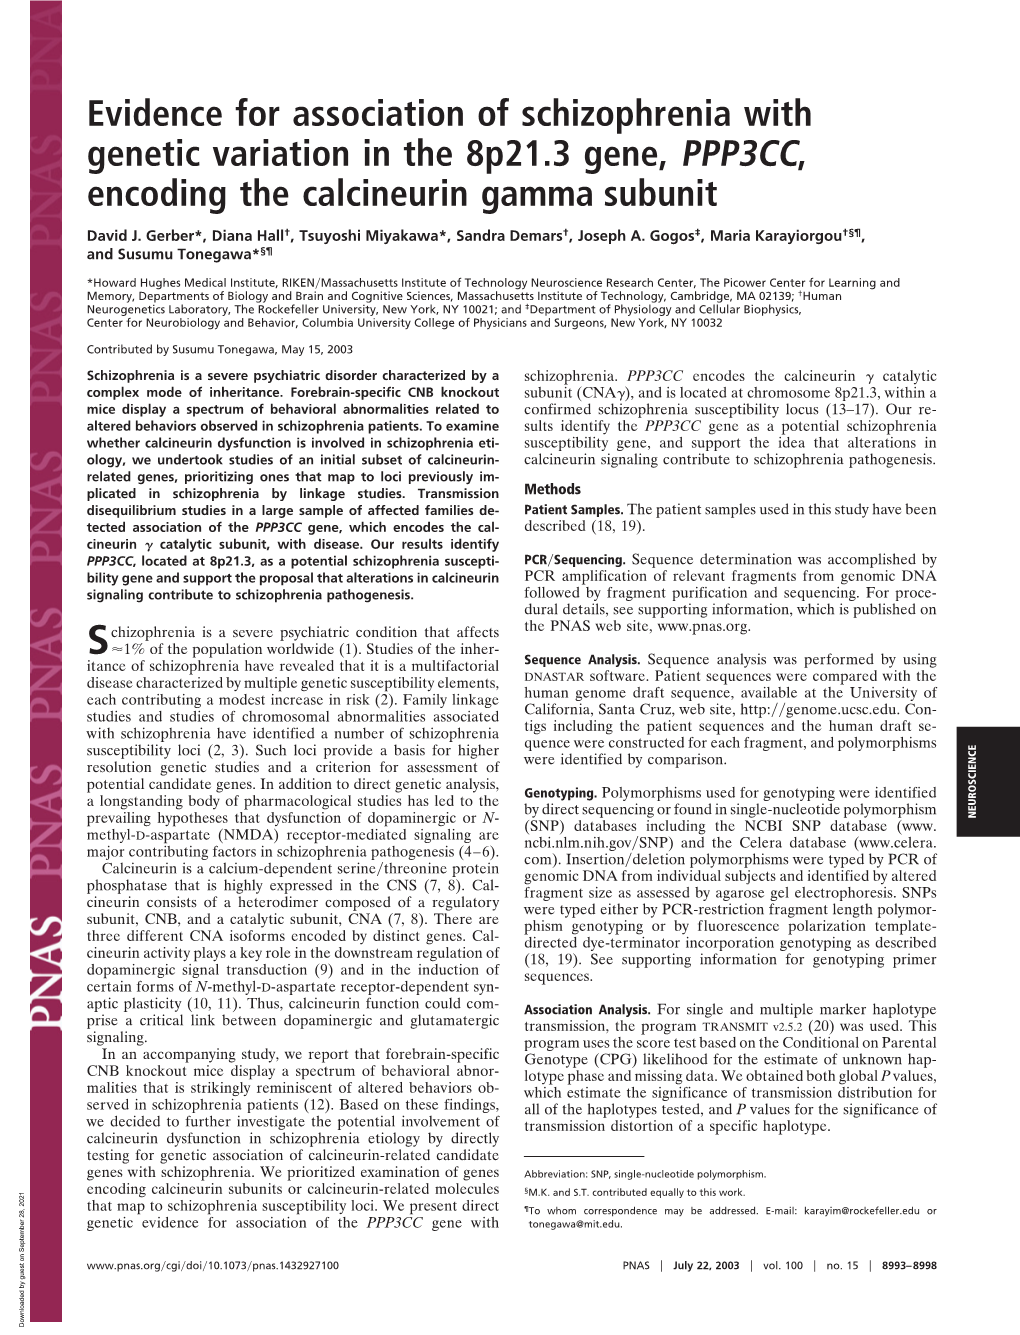 Evidence for Association of Schizophrenia with Genetic Variation in the 8P21.3 Gene, PPP3CC, Encoding the Calcineurin Gamma Subunit